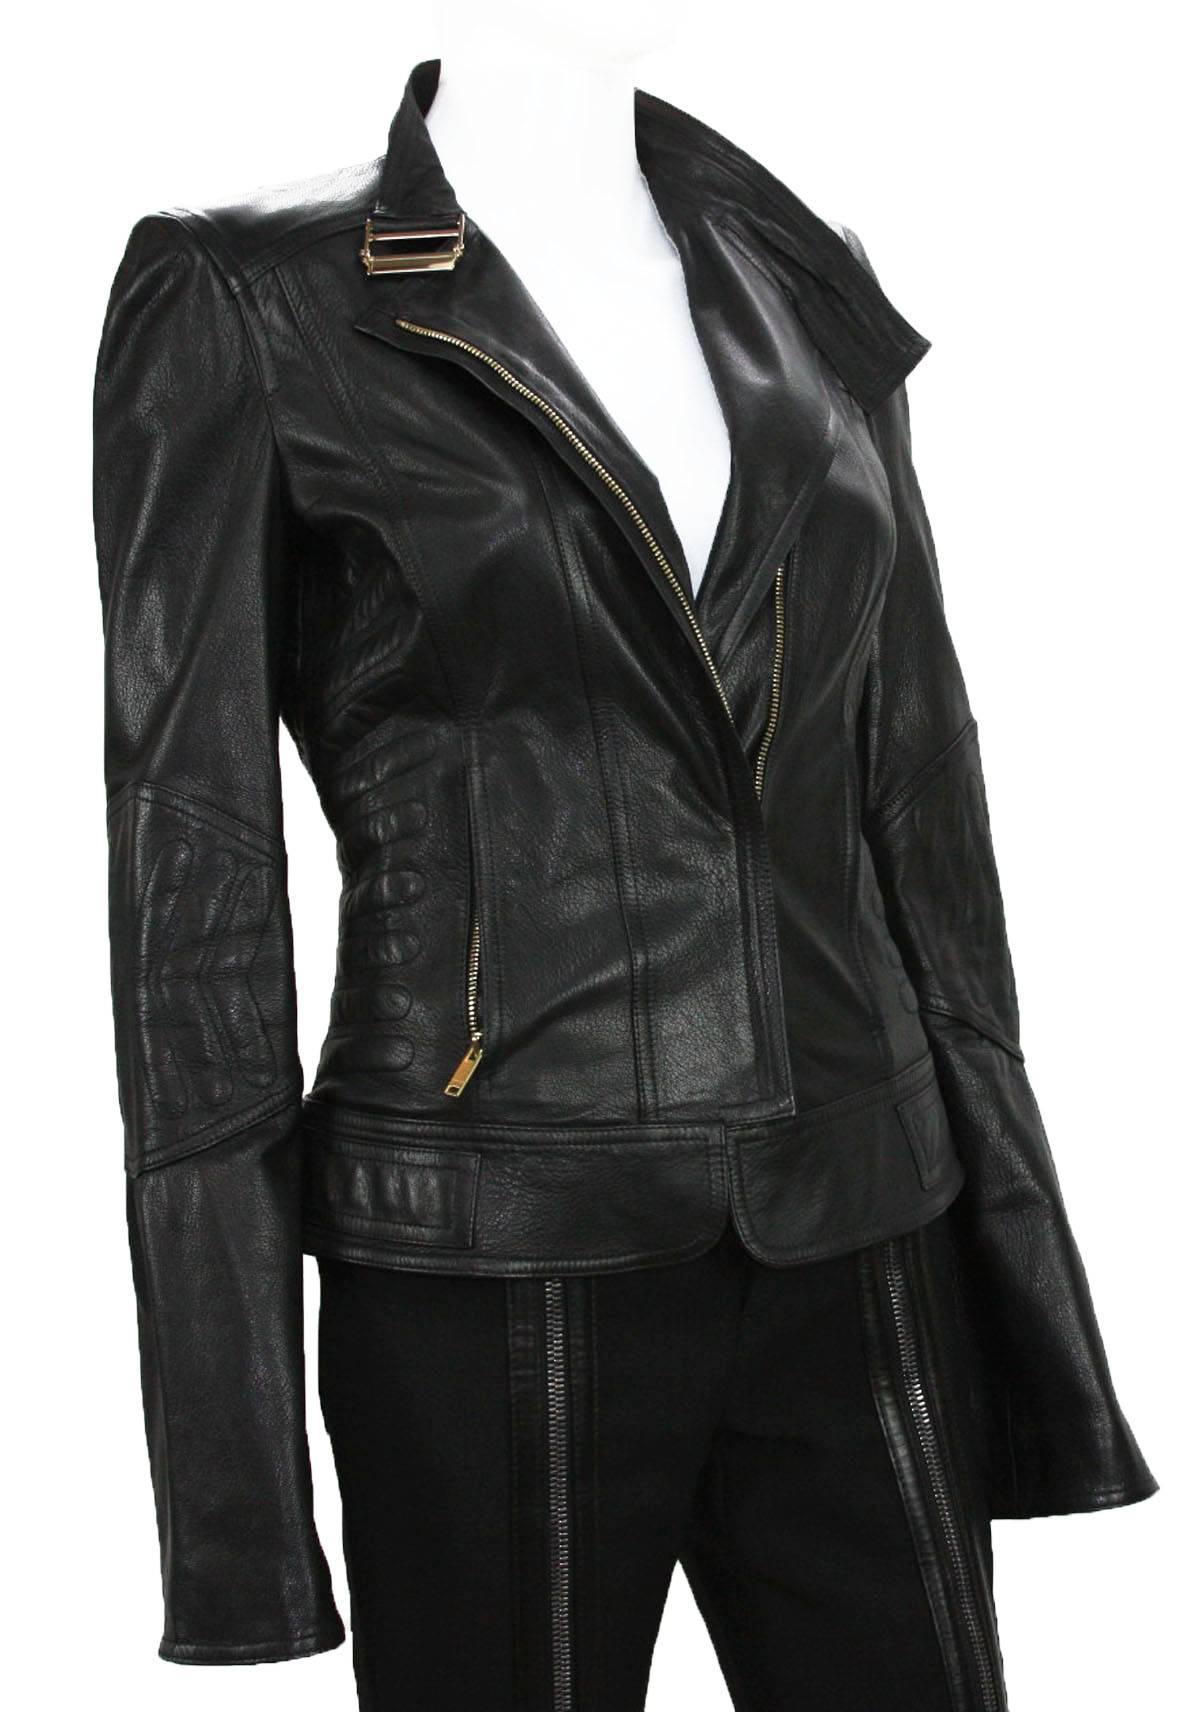 TOM FORD for GUCCI 2004 Collection Leather Chevron Black Jacket It. 40 - US 4 In Excellent Condition For Sale In Montgomery, TX